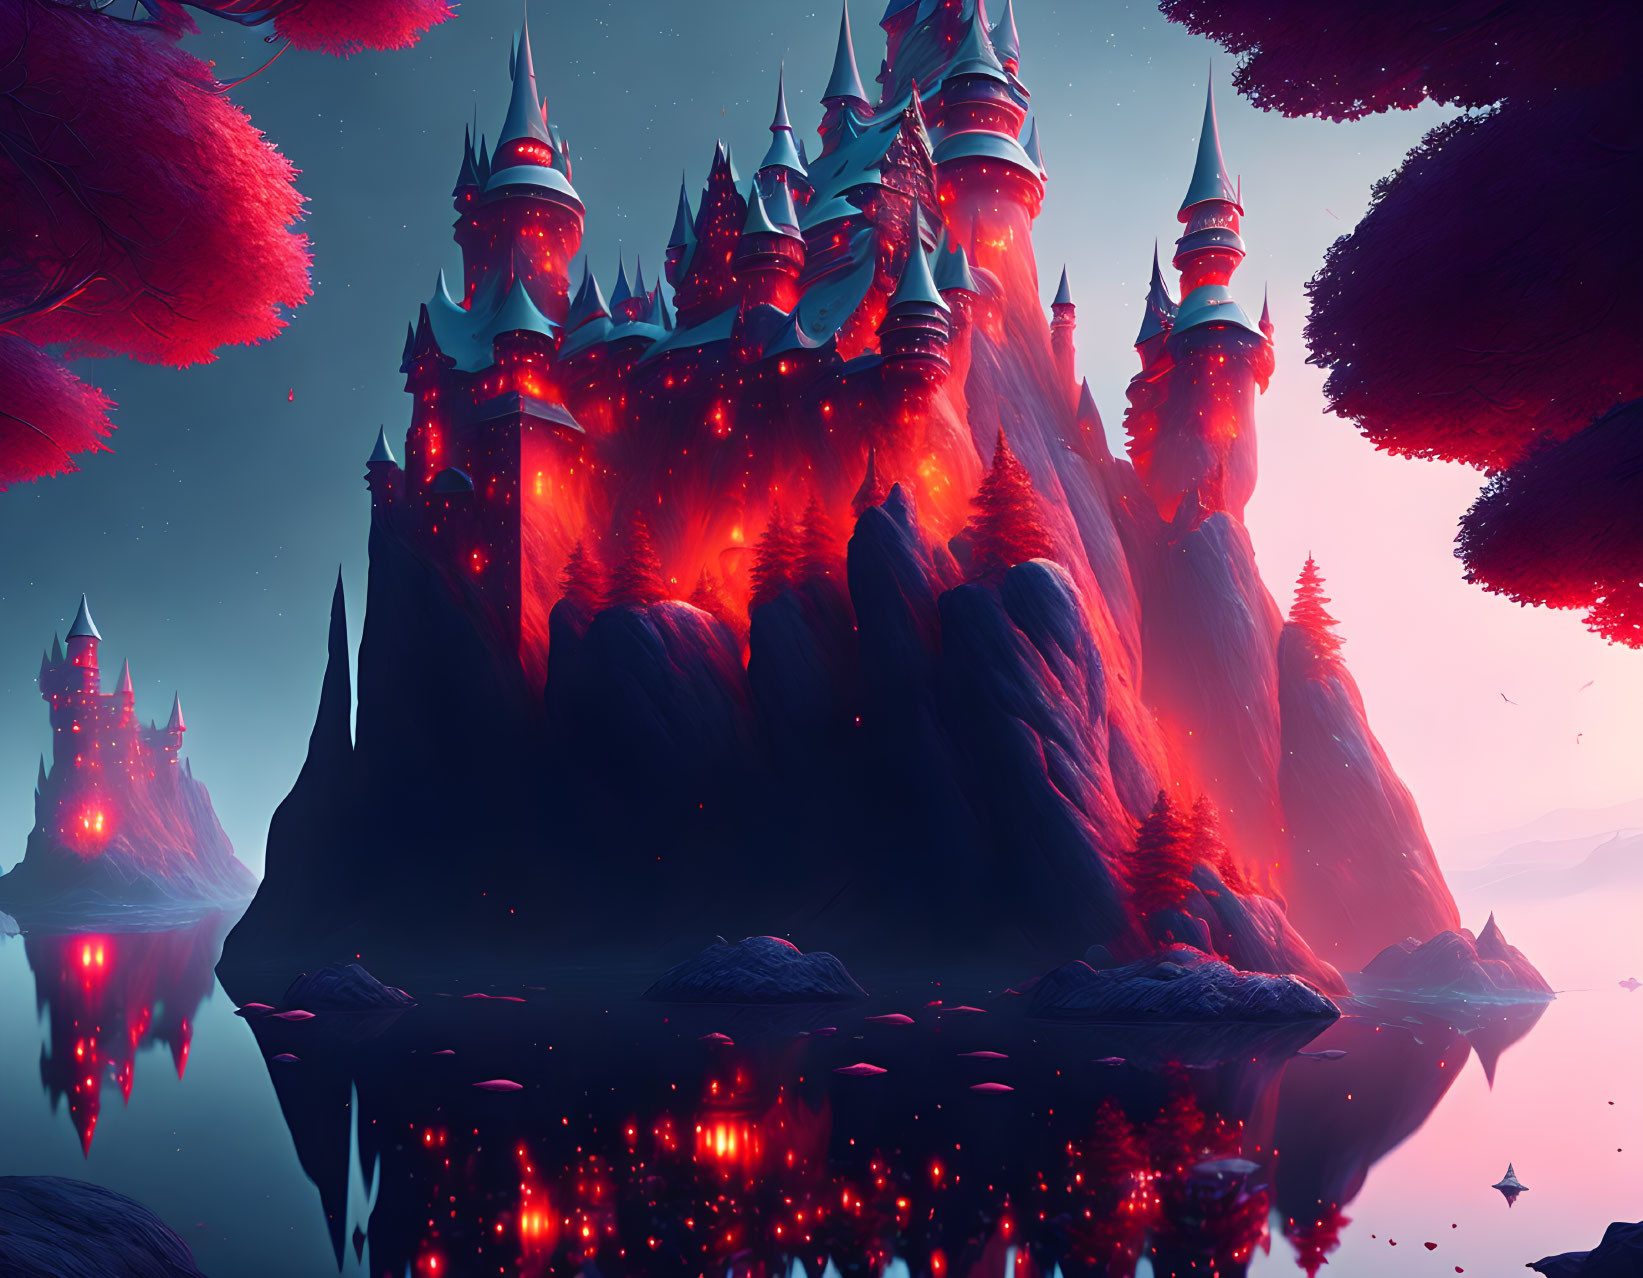 Crimson castle with spires on mountain island by serene lake